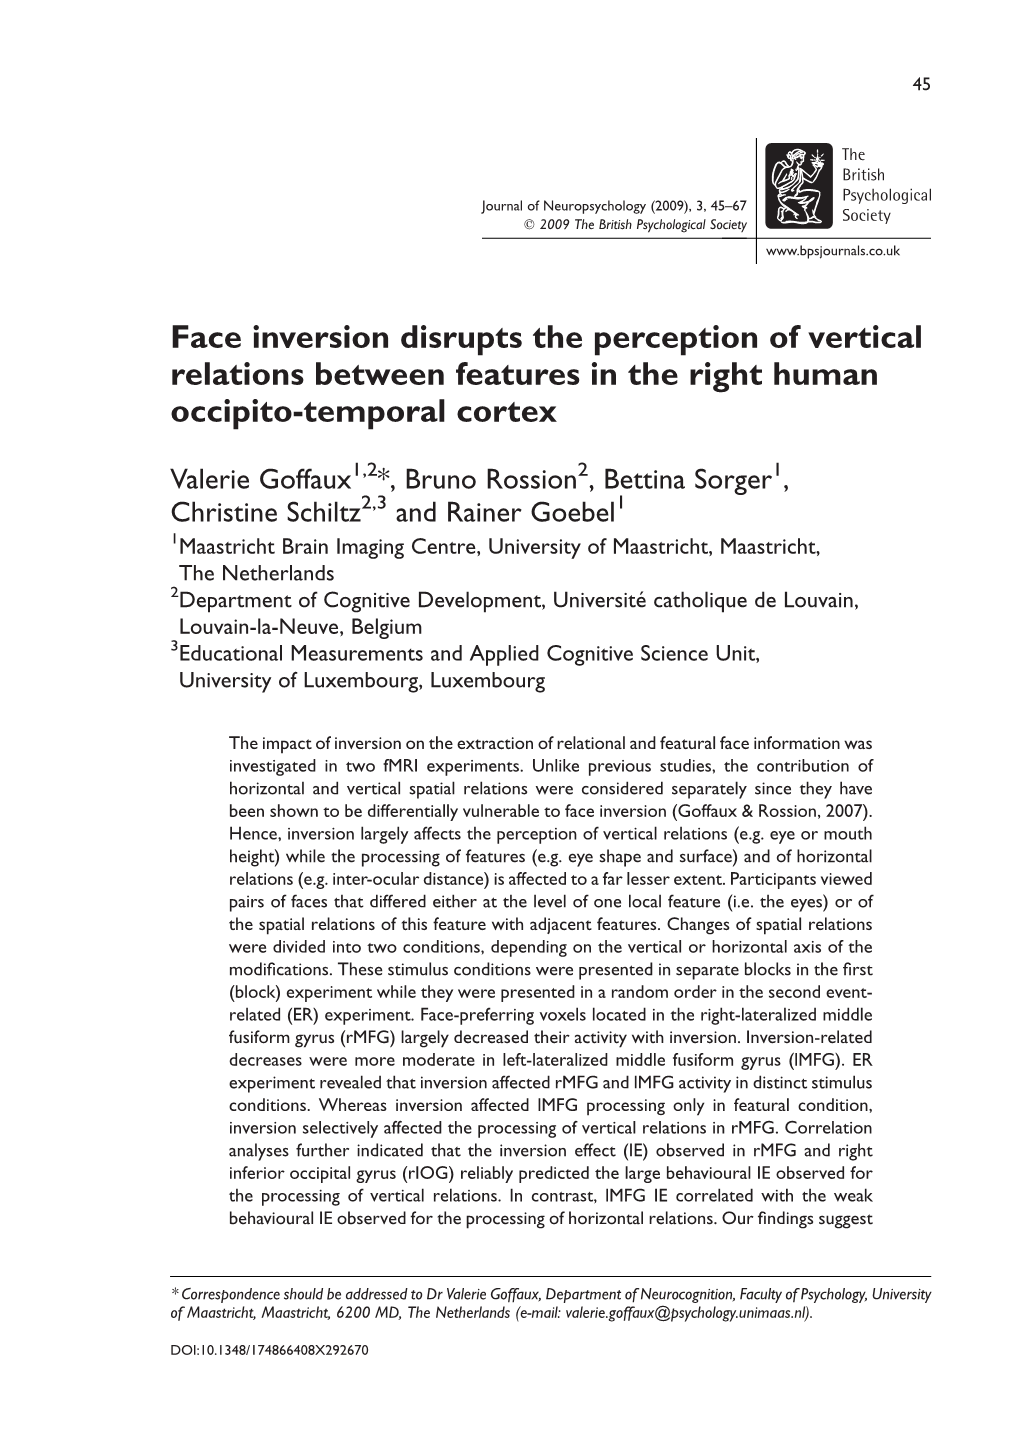 Face Inversion Disrupts the Perception of Vertical Relations Between Features in the Right Human Occipito-Temporal Cortex